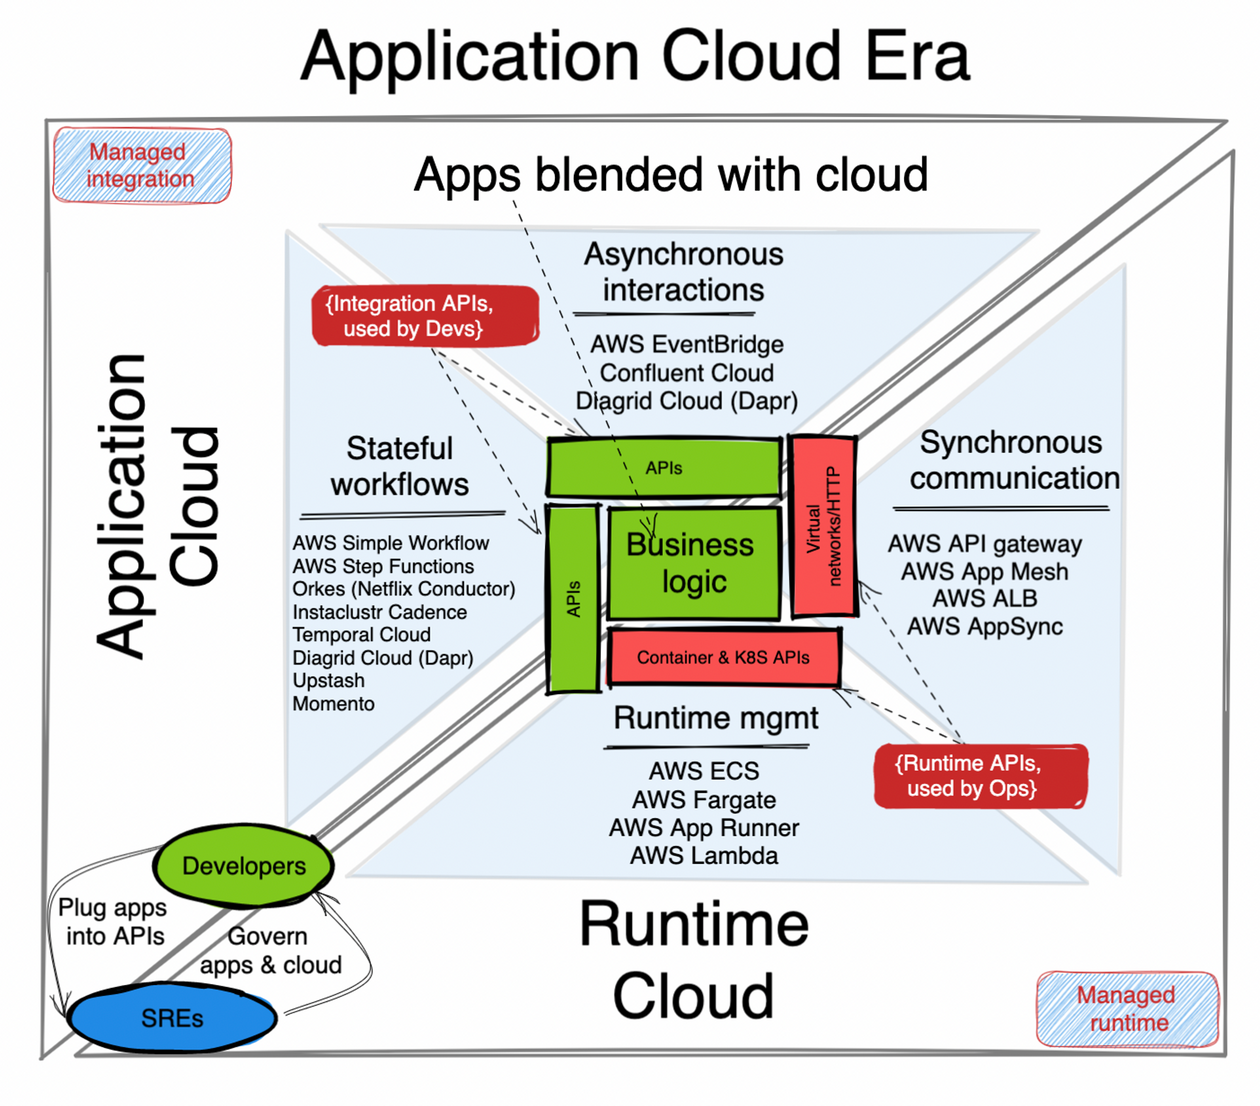 Applications blended with runtime and integration cloud services